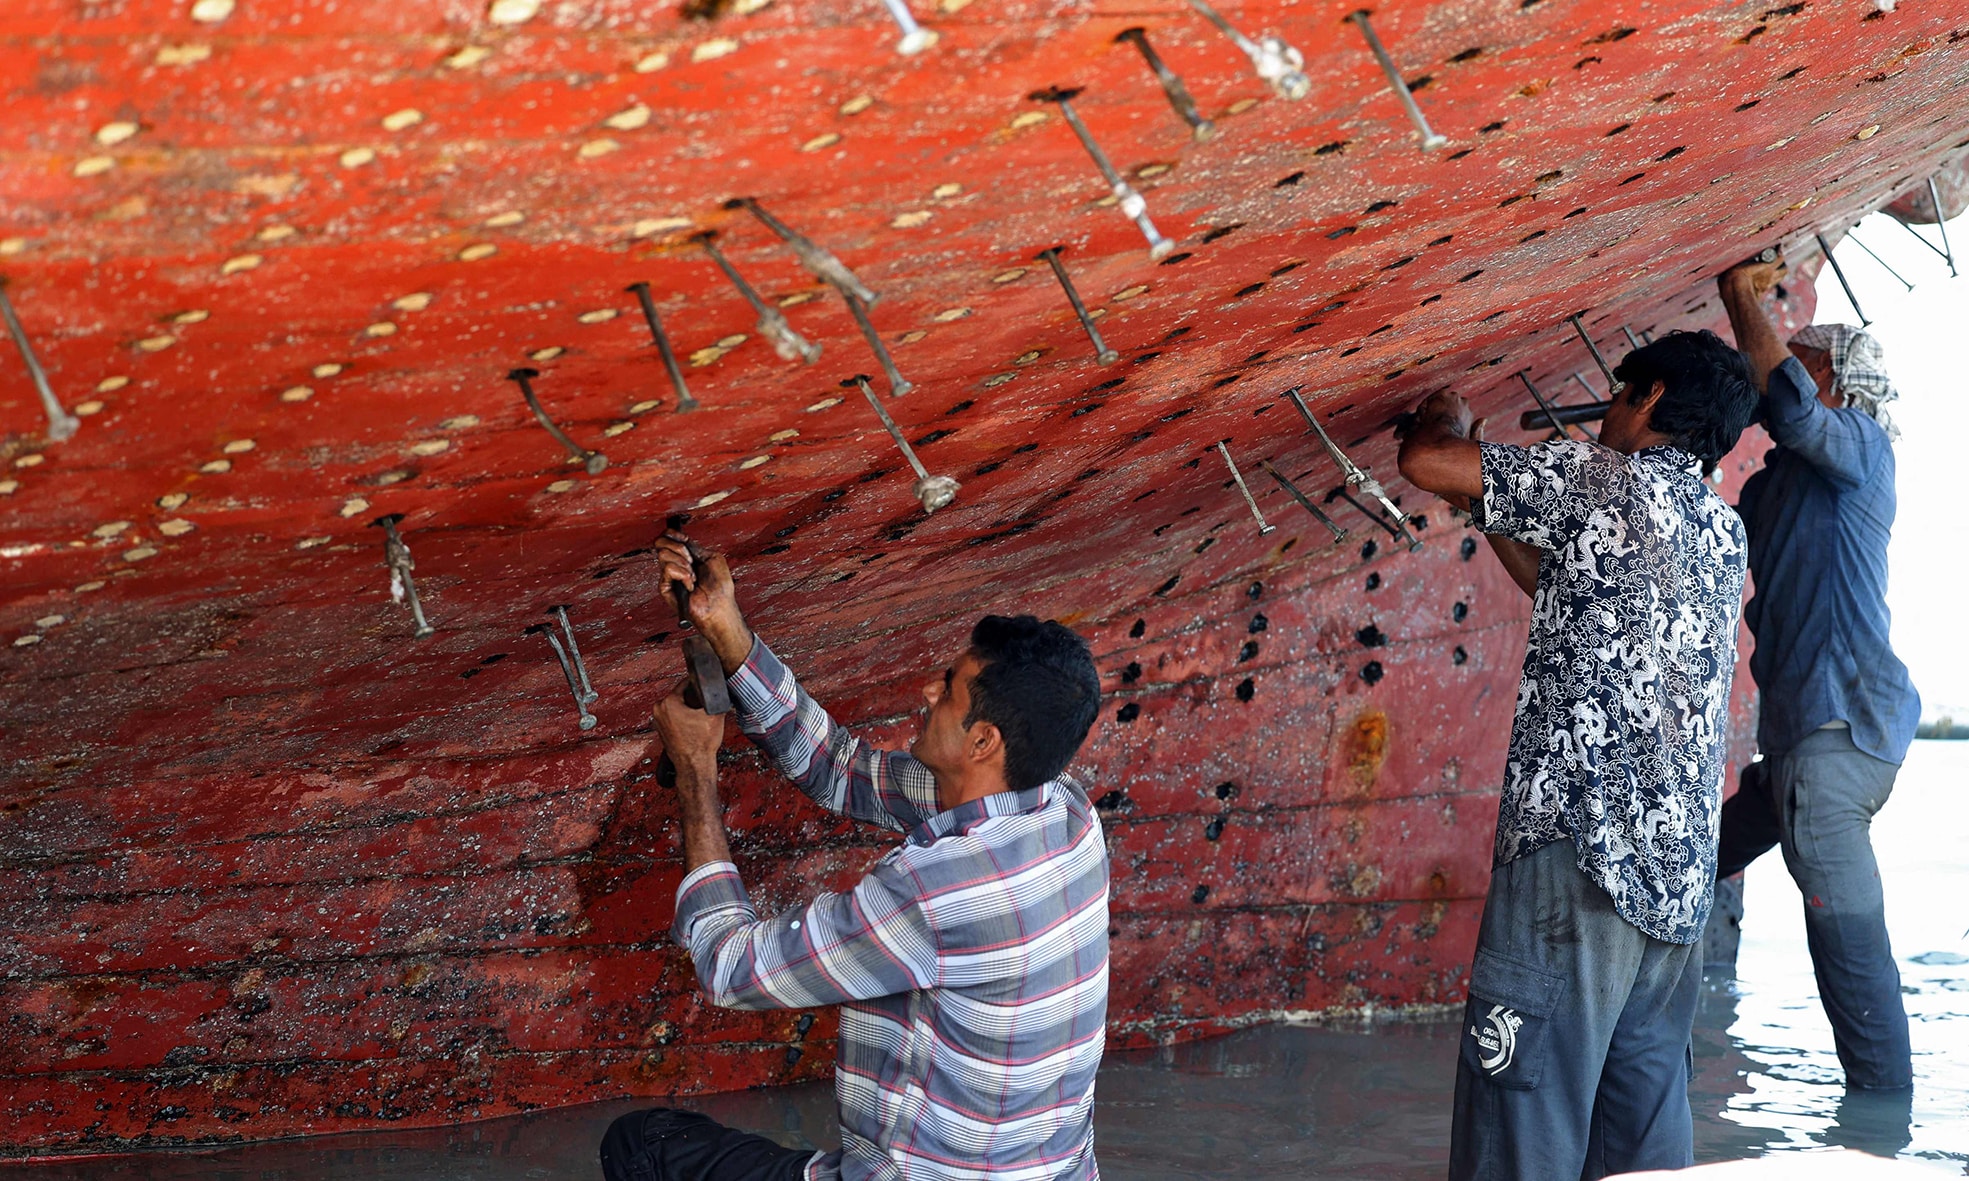 Workers restore a traditional wooden ship (lenj) in a shipyard.